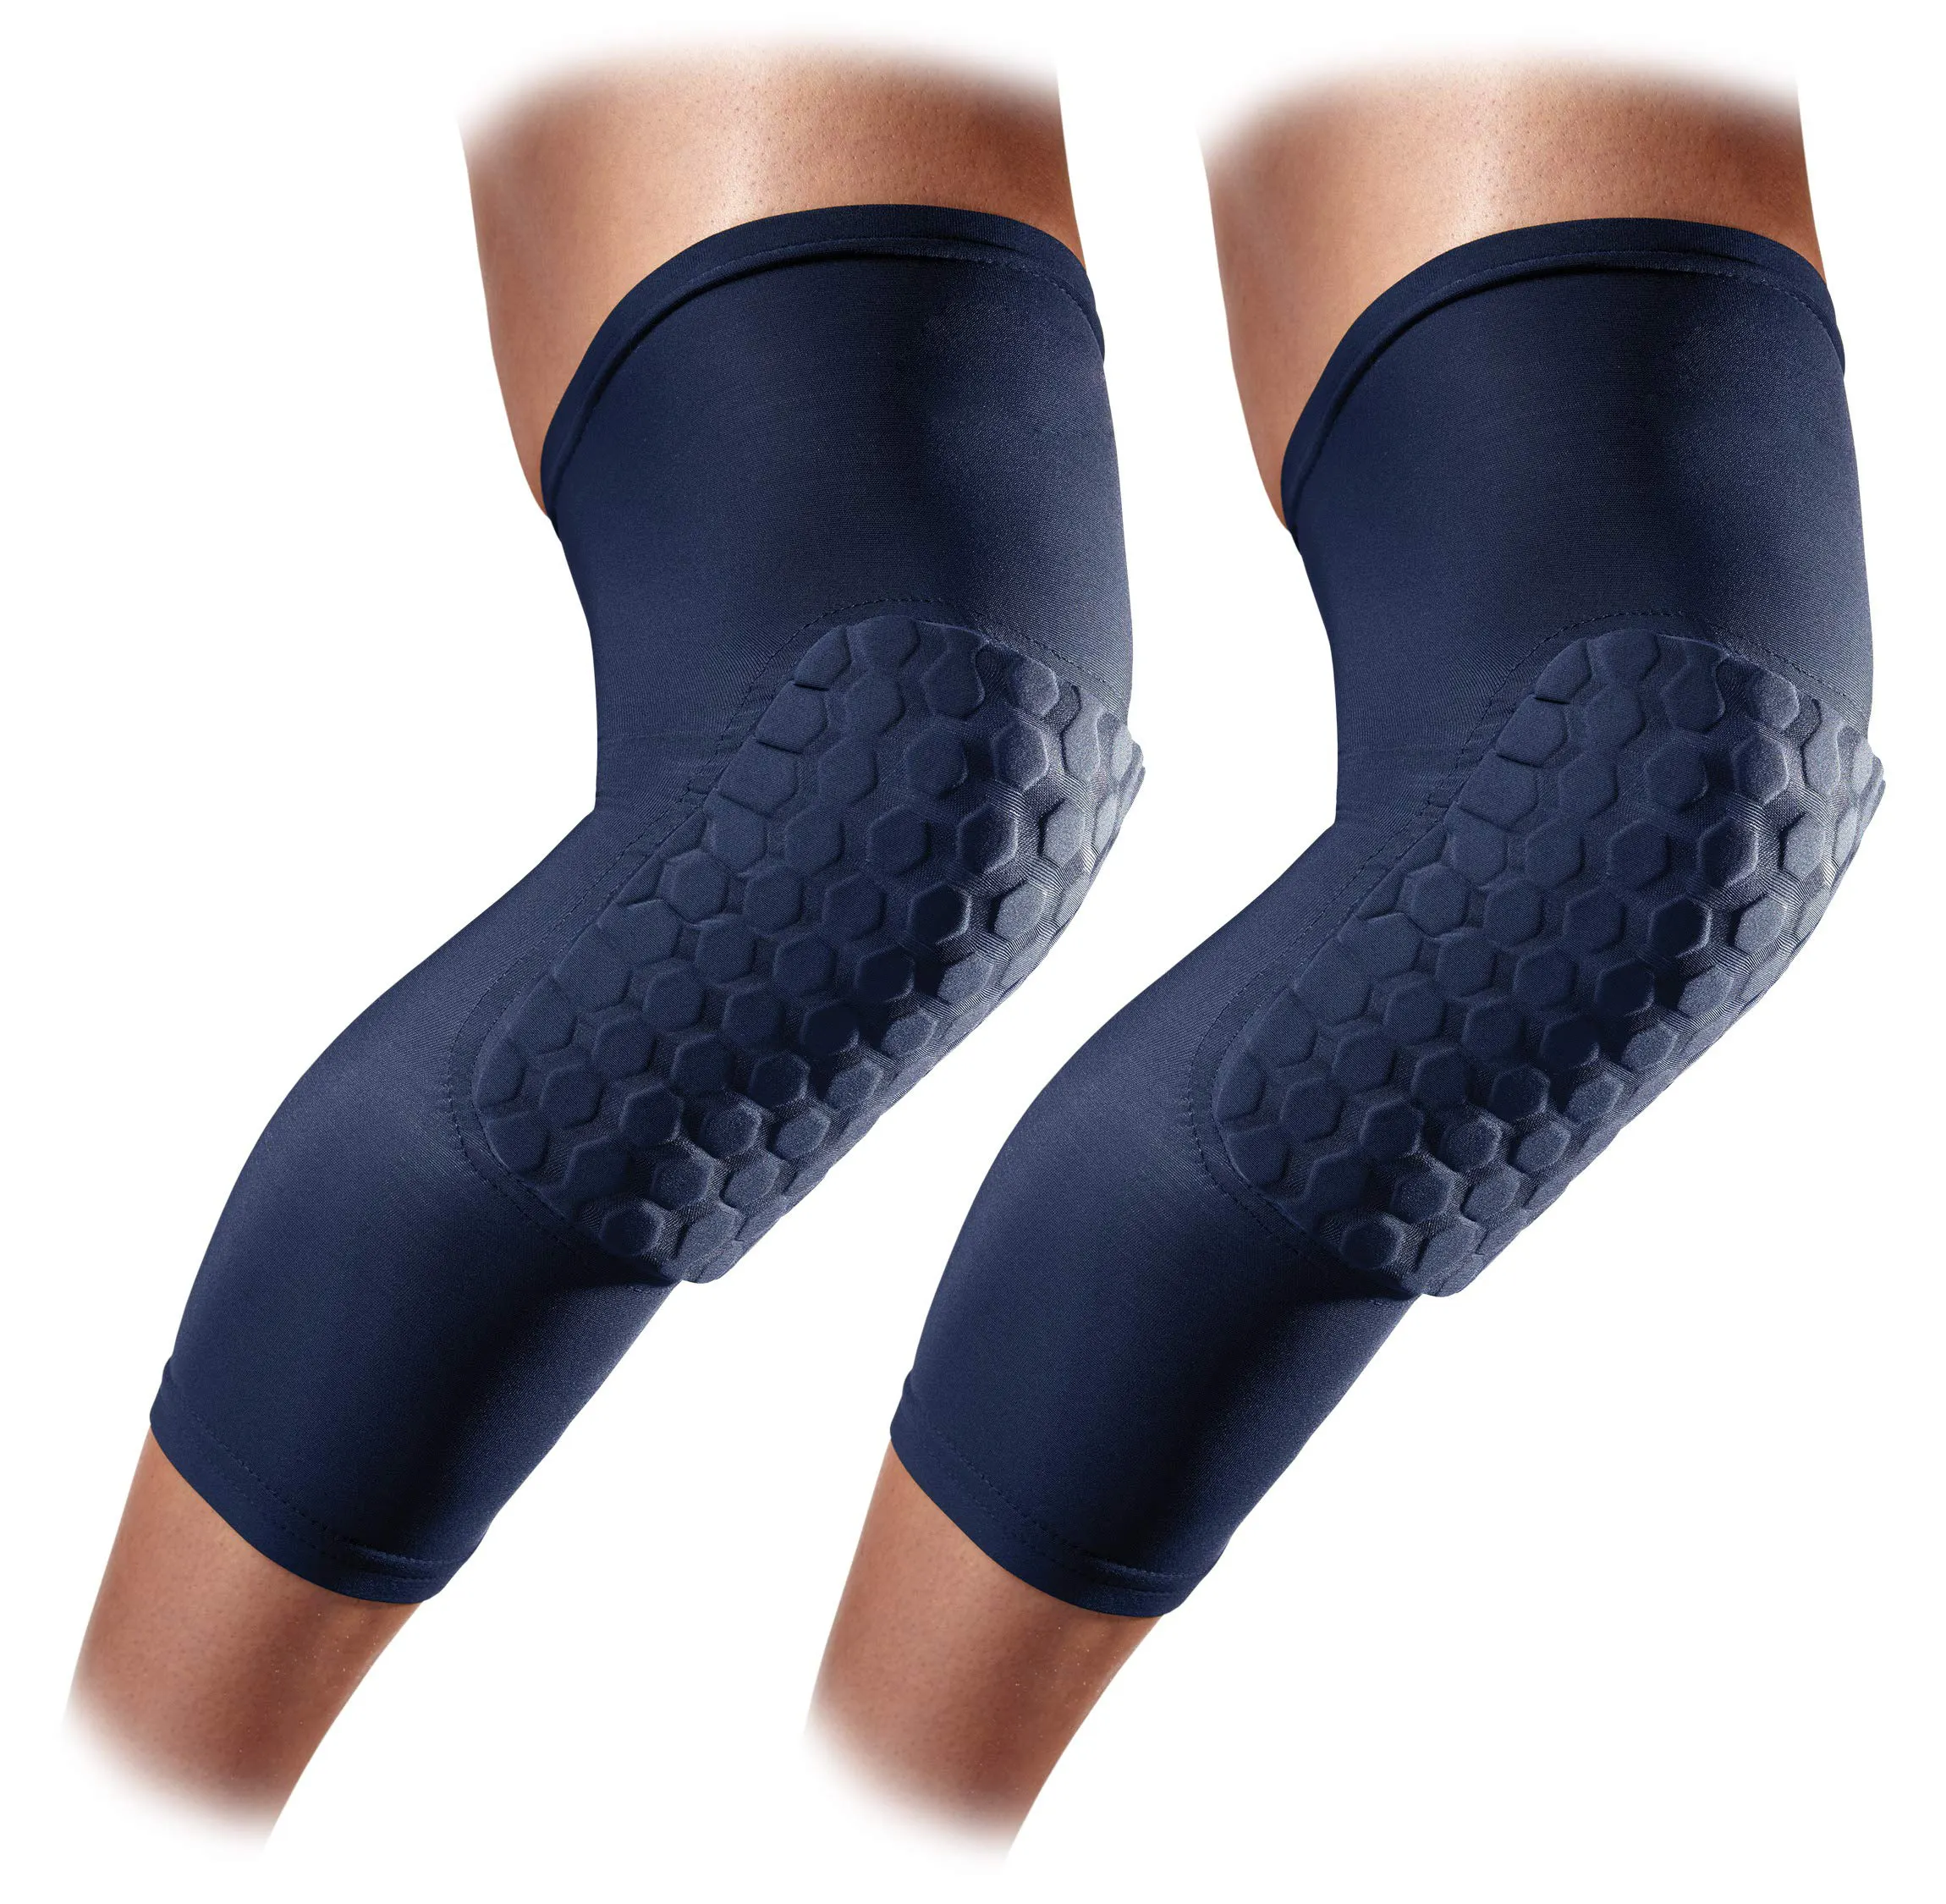 Sports Crashproof Knee Pads Breathable Non-slip Honeycomb Knee Support Brace Basketball Leg Compression Sleeve Protector Gear